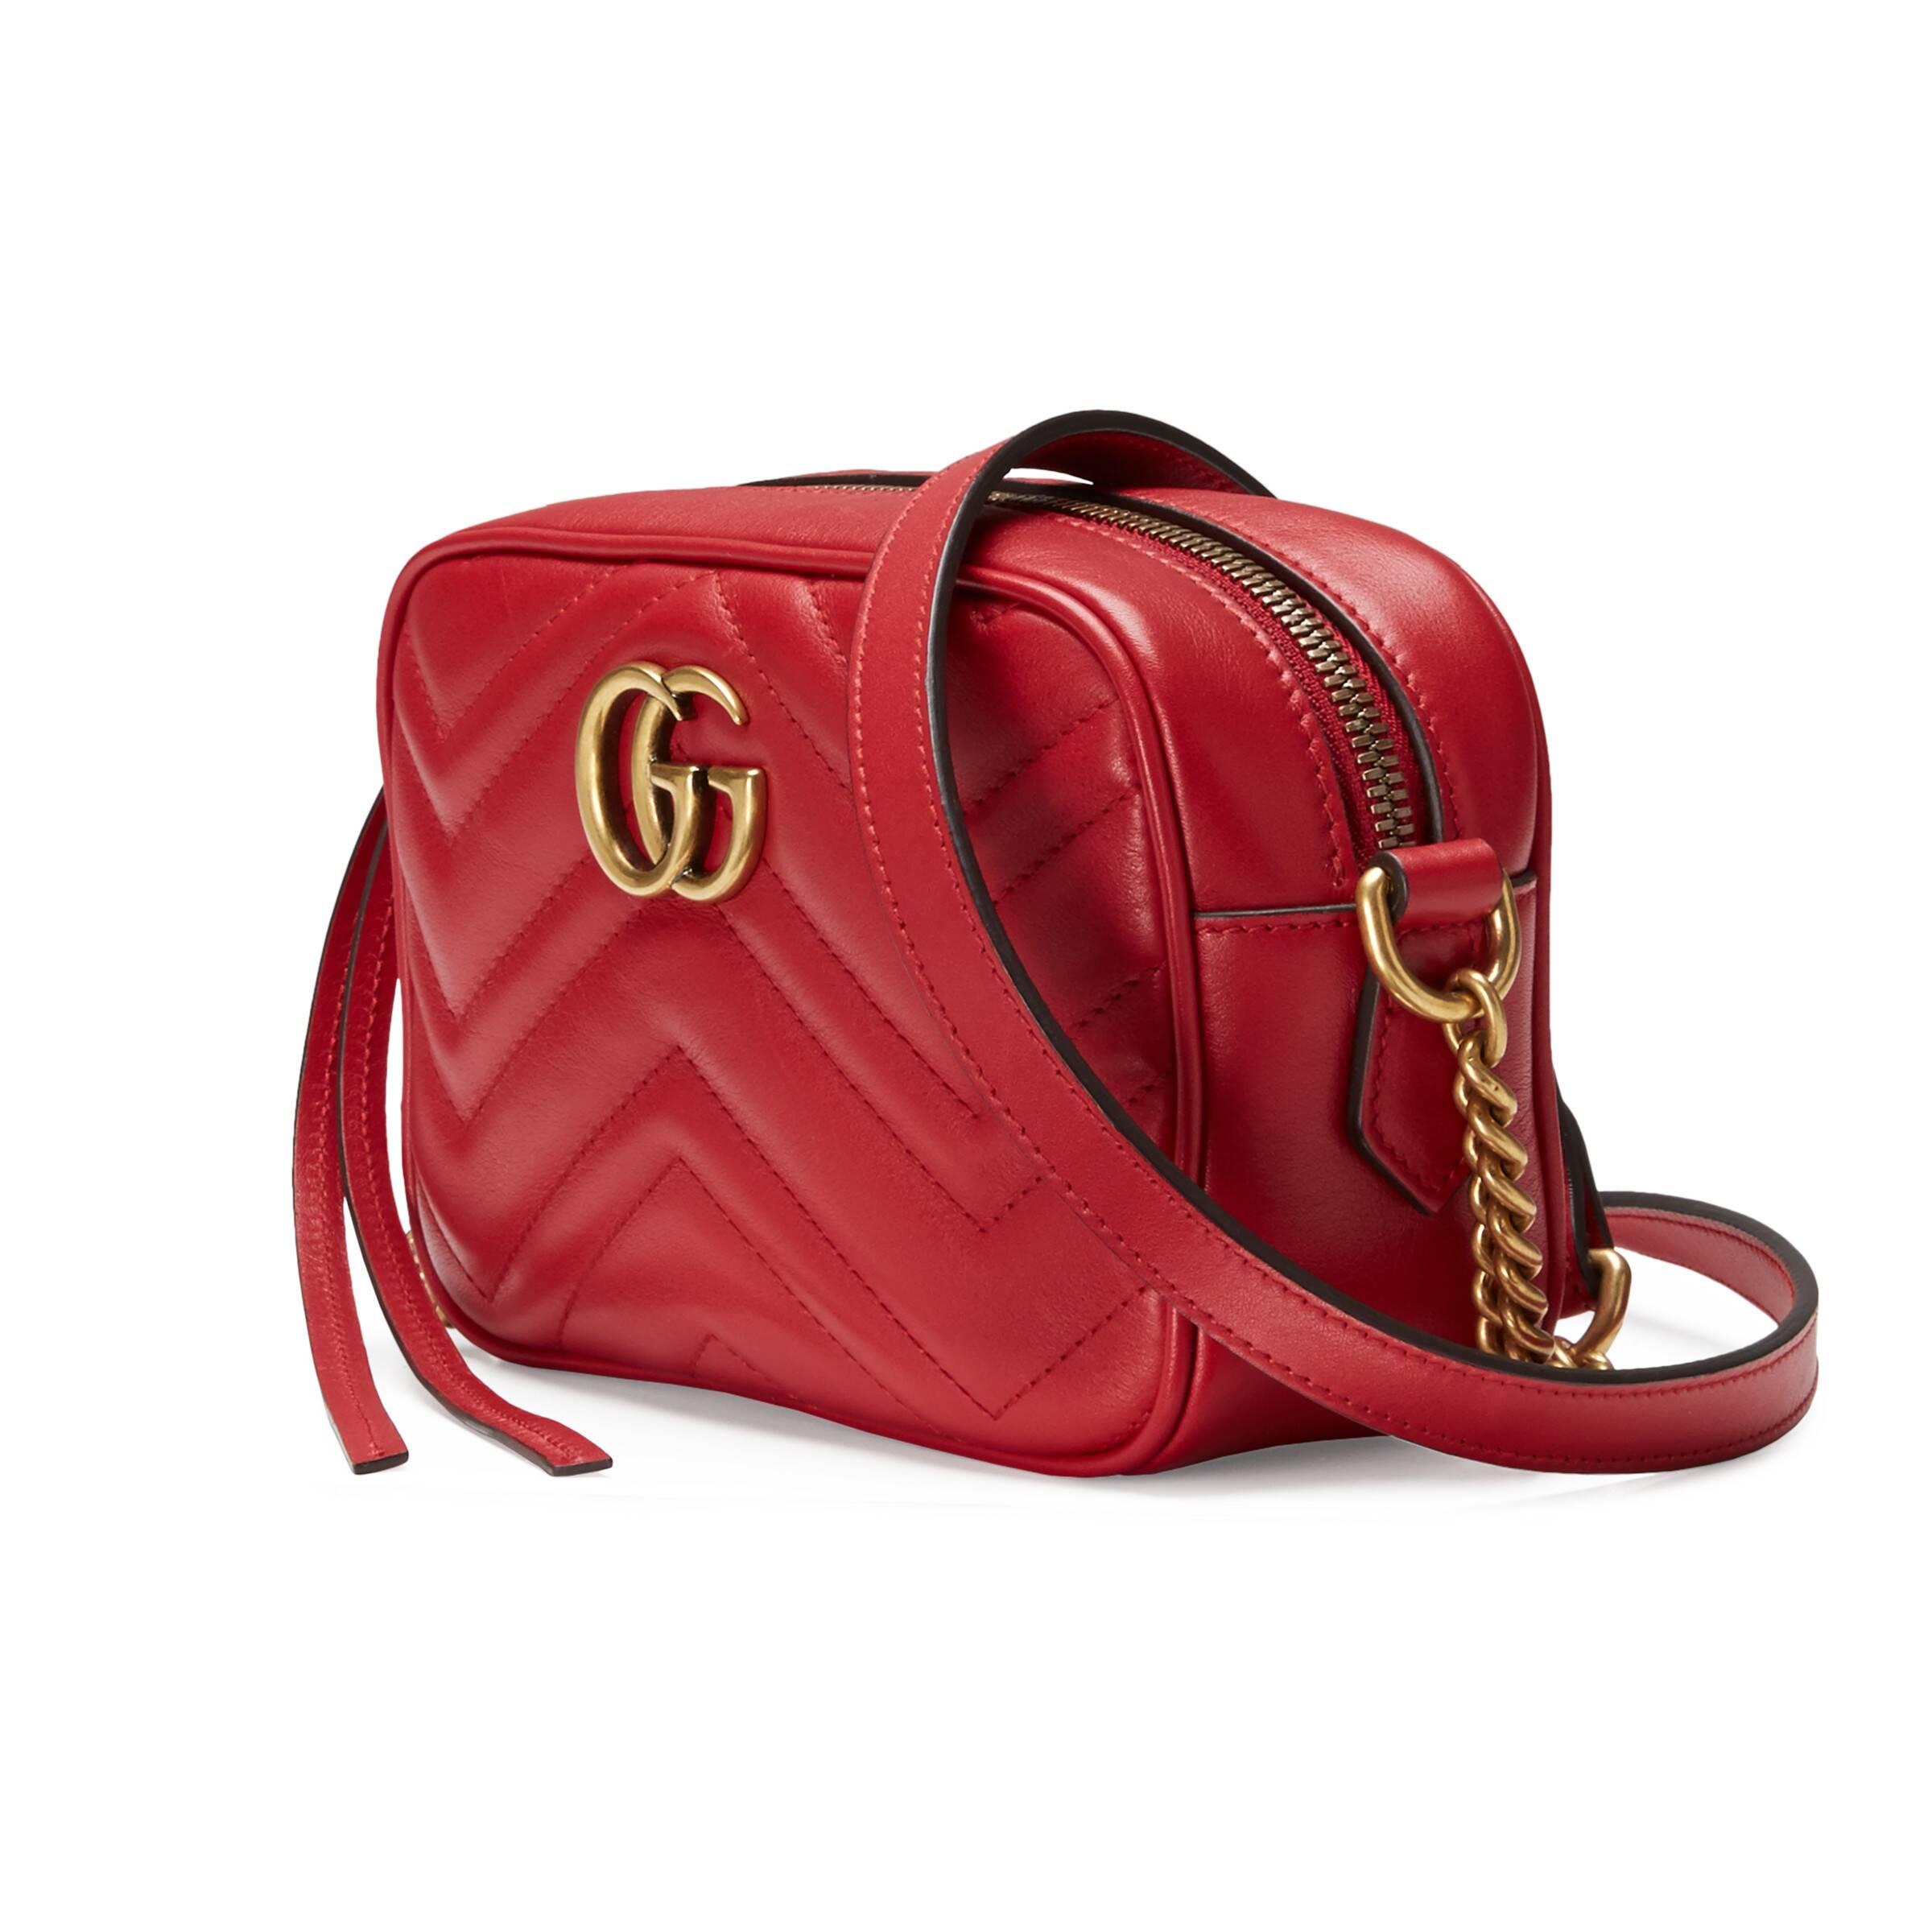 Gucci Leather GG Marmont Matelassé Mini Bag in Red - Lyst